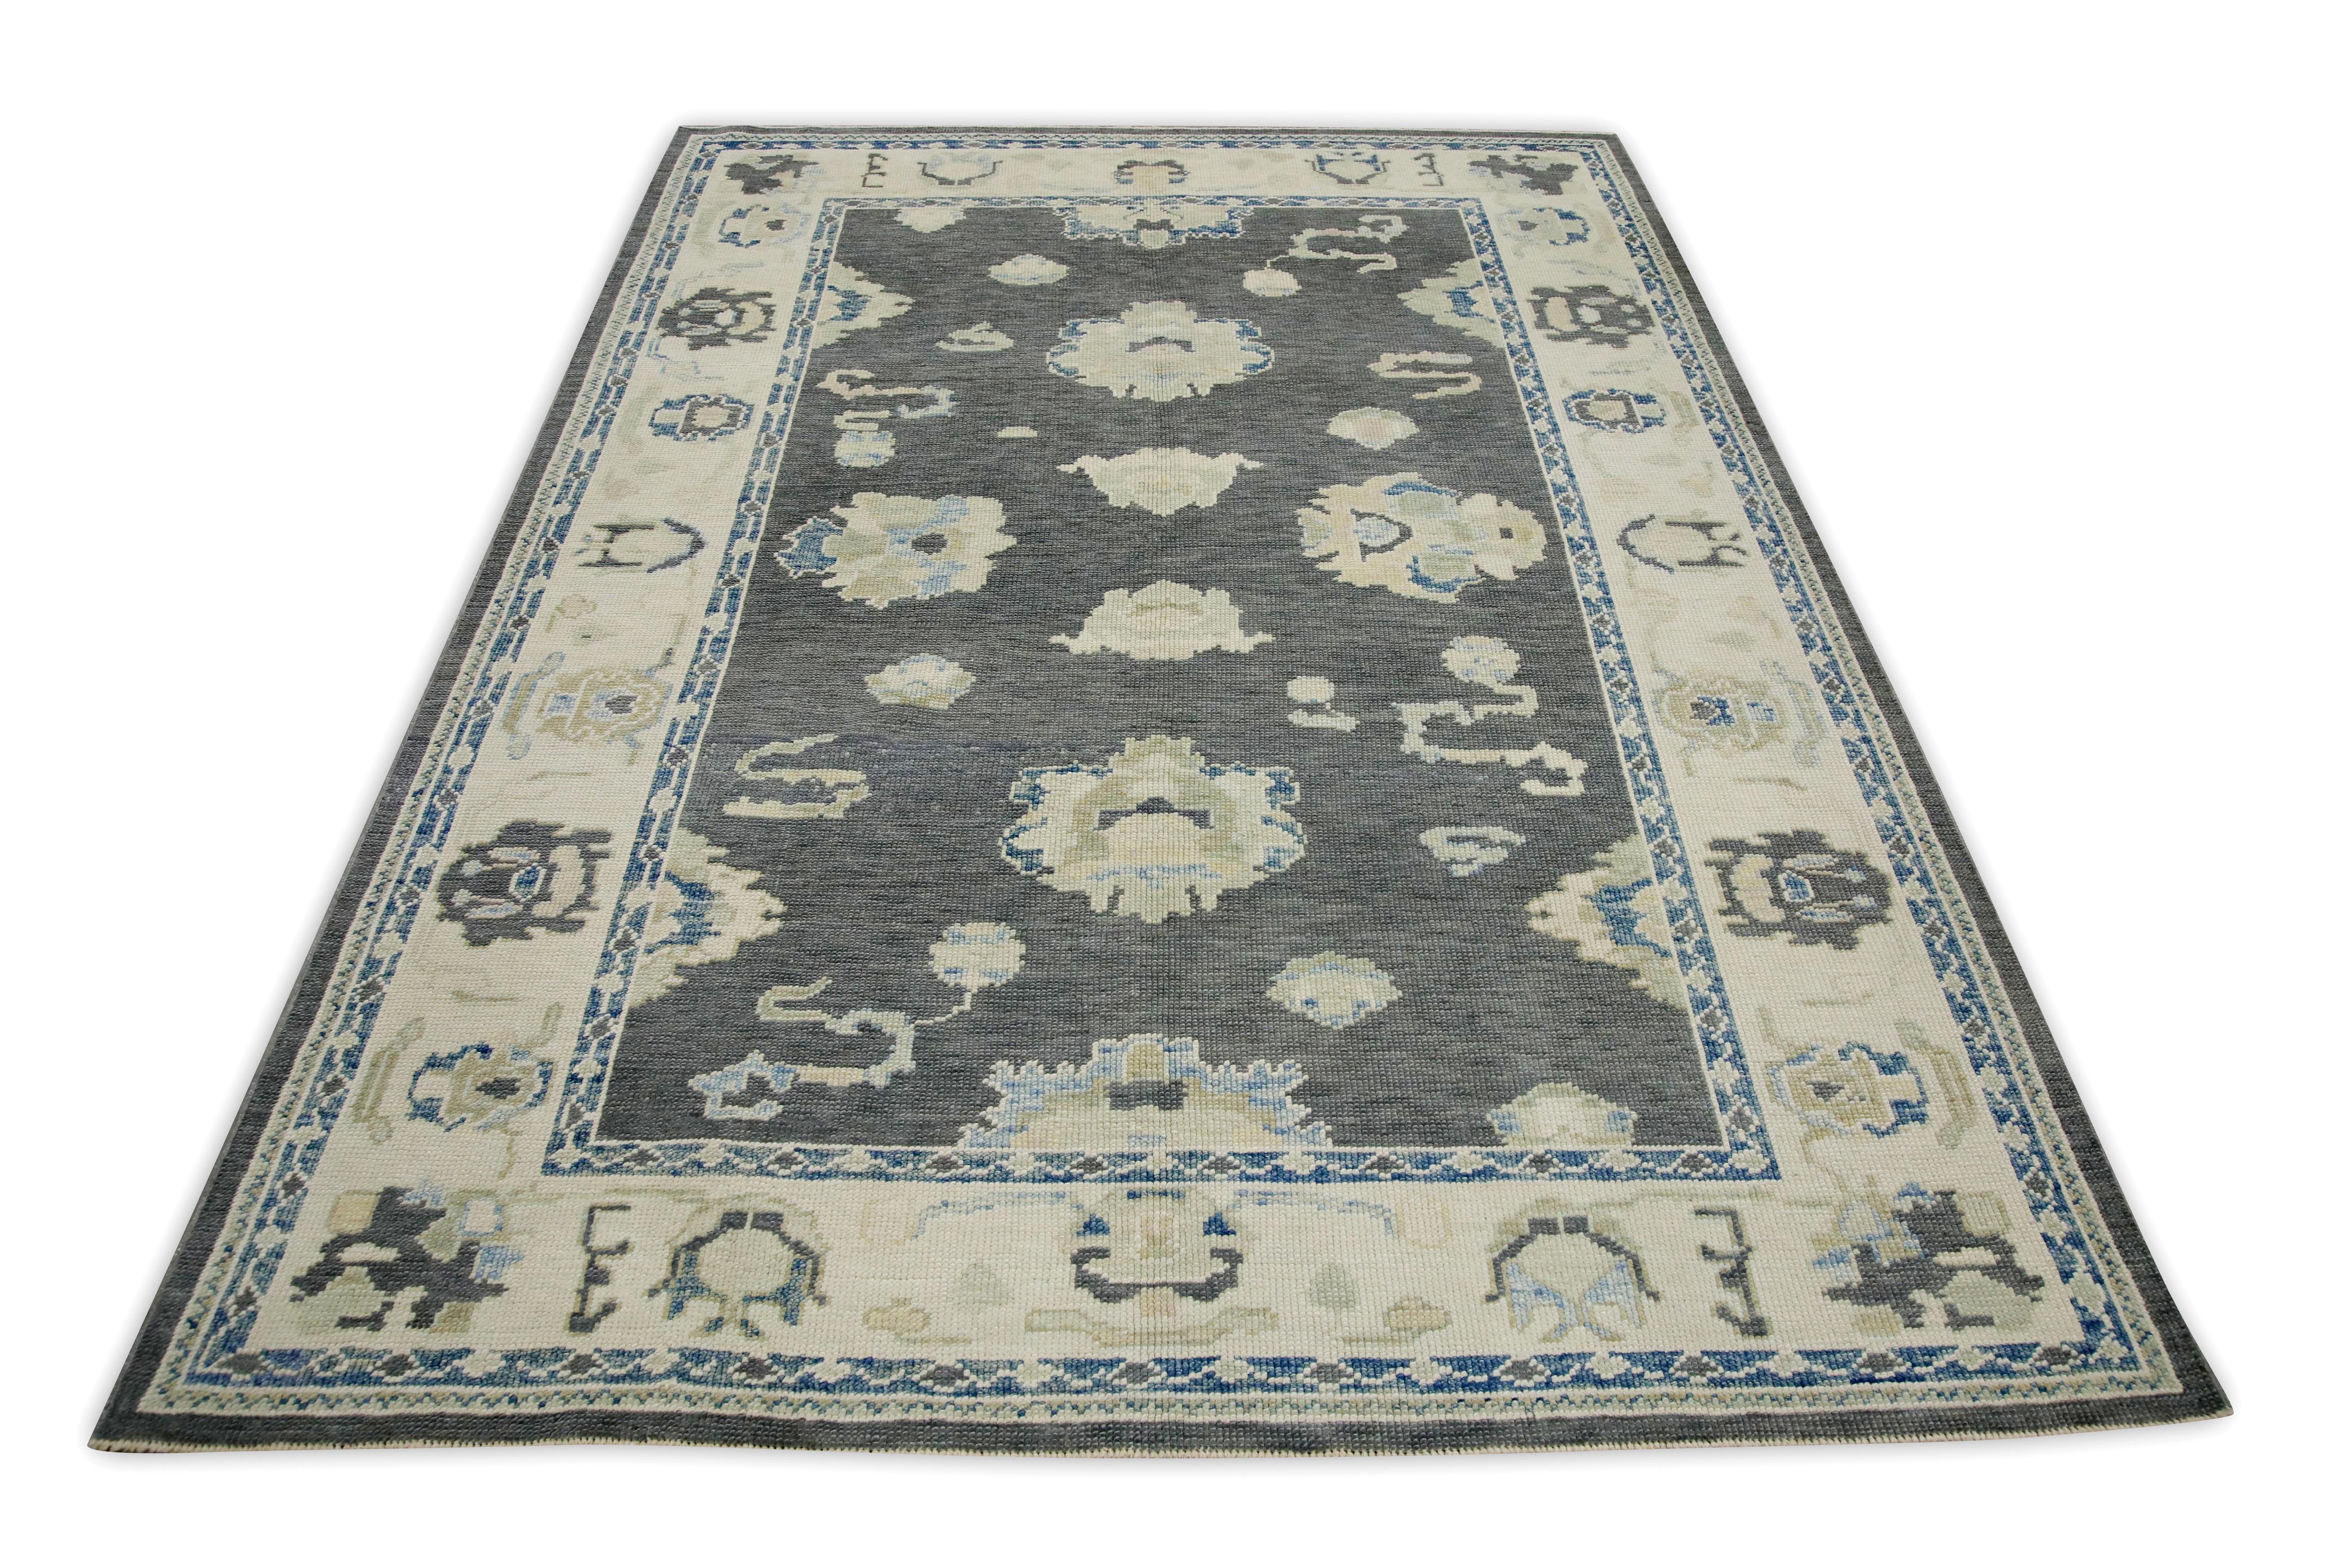 Contemporary Charcoal & Blue Floral Design Handwoven Wool Turkish Oushak Rug 5'10